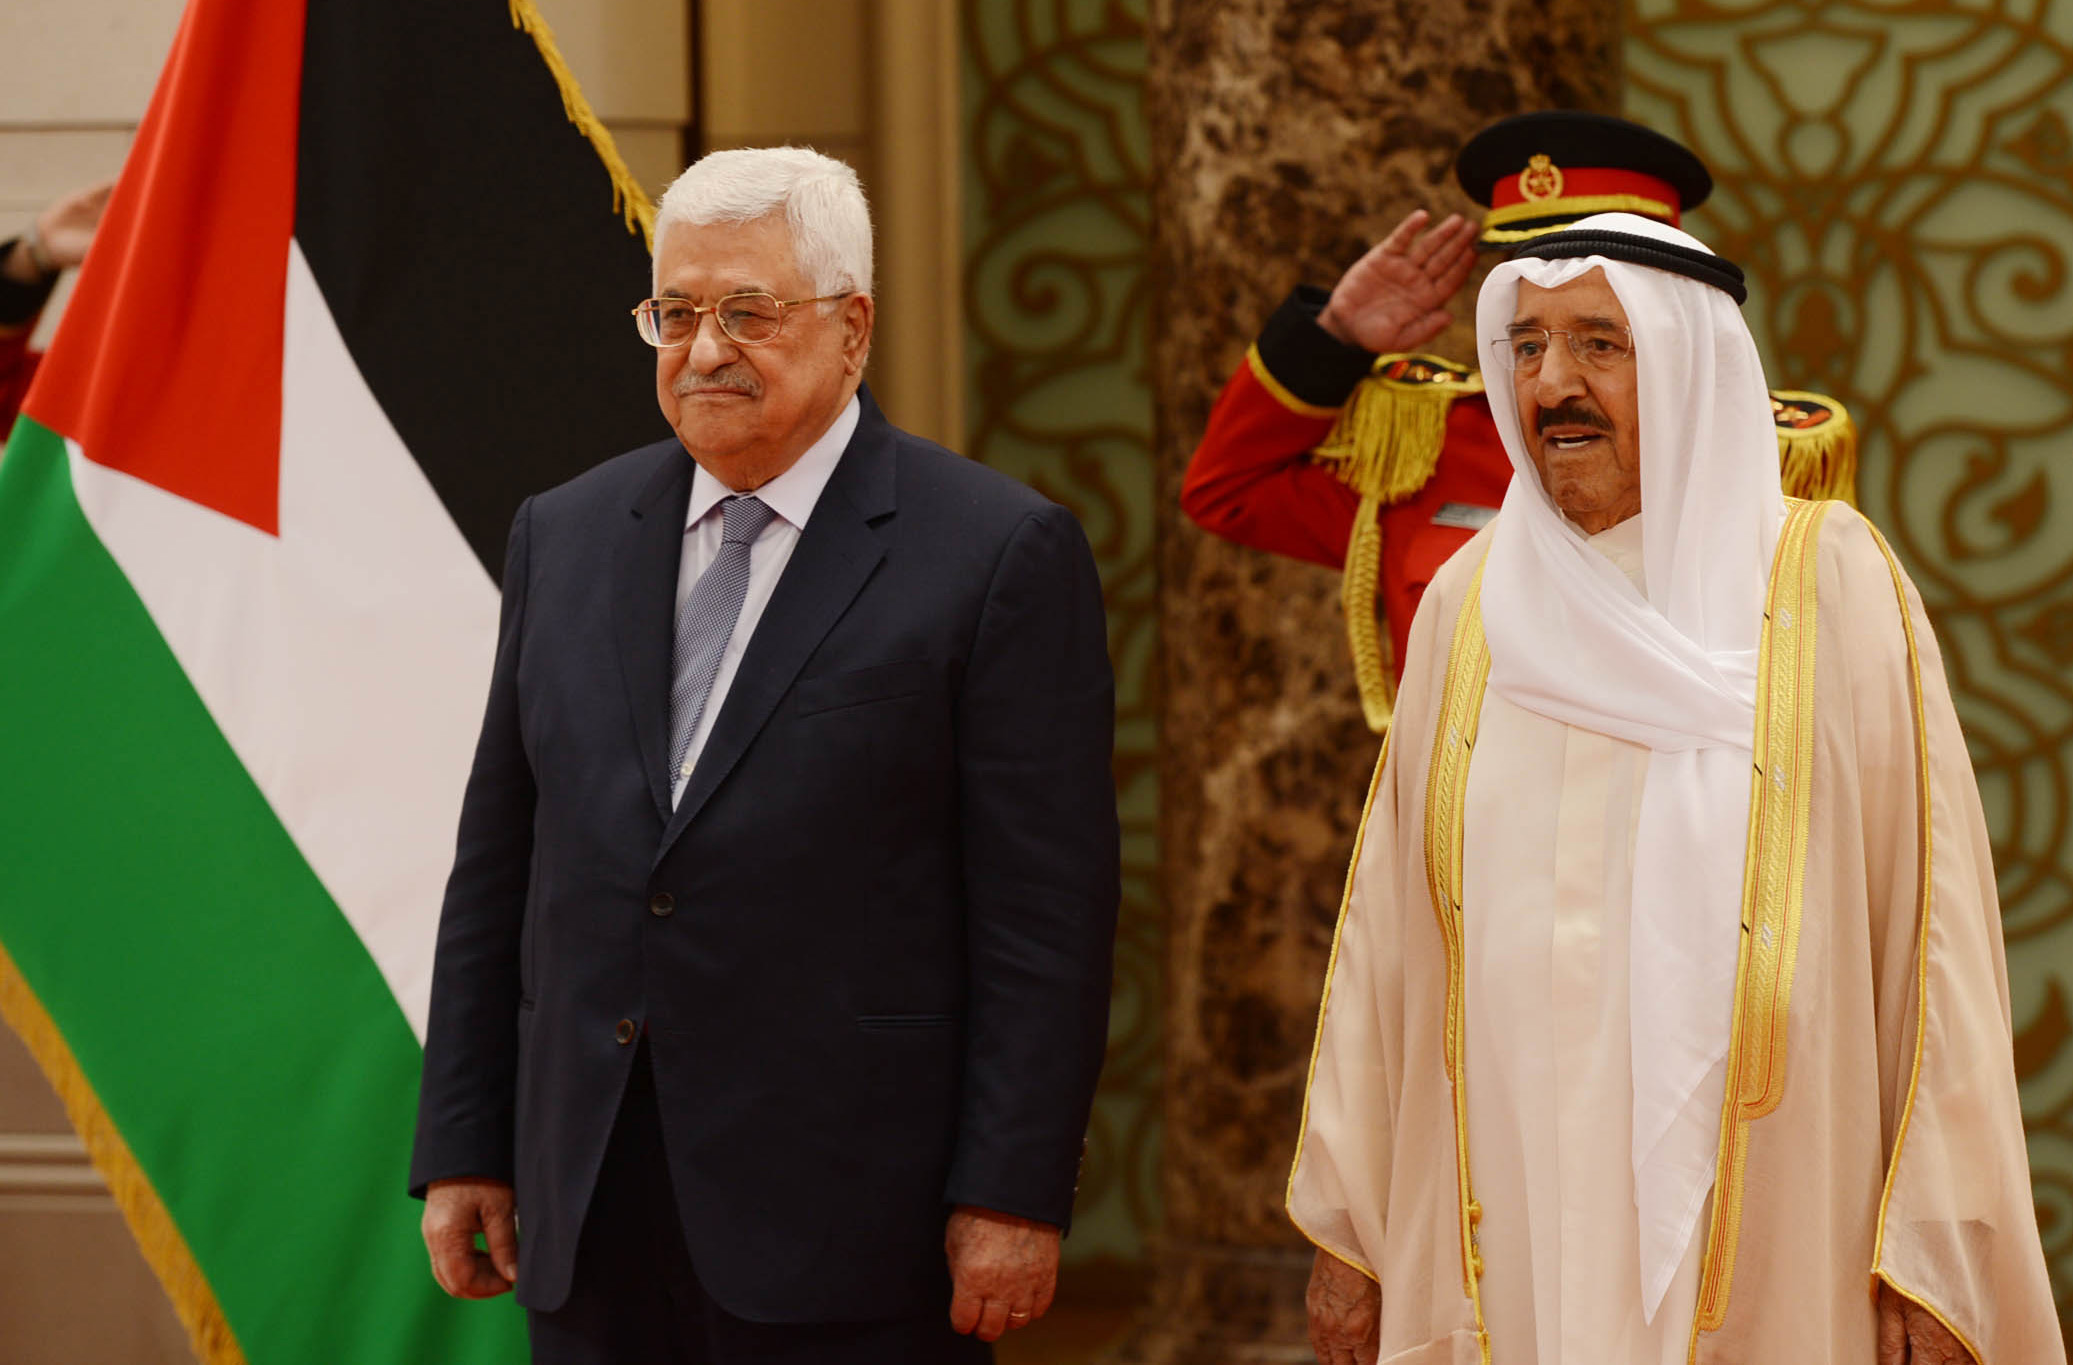 A handout picture provided by the Palestinian Authority's press office (PPO) on April 23, 2017, shows Palestinian leader Mahmud Abbas (L) meeting with the emir of Kuwait, Sheikh Sabah al-Ahmad al-Jaber al-Sabah, in Kuwait City. / AFP PHOTO / PPO / THAER GHANAIM / RESTRICTED TO EDITORIAL USE - MANDATORY CREDIT "AFP PHOTO / PPO / THAER GHANAIM" - NO MARKETING NO ADVERTISING CAMPAIGNS - DISTRIBUTED AS A SERVICE TO CLIENTS